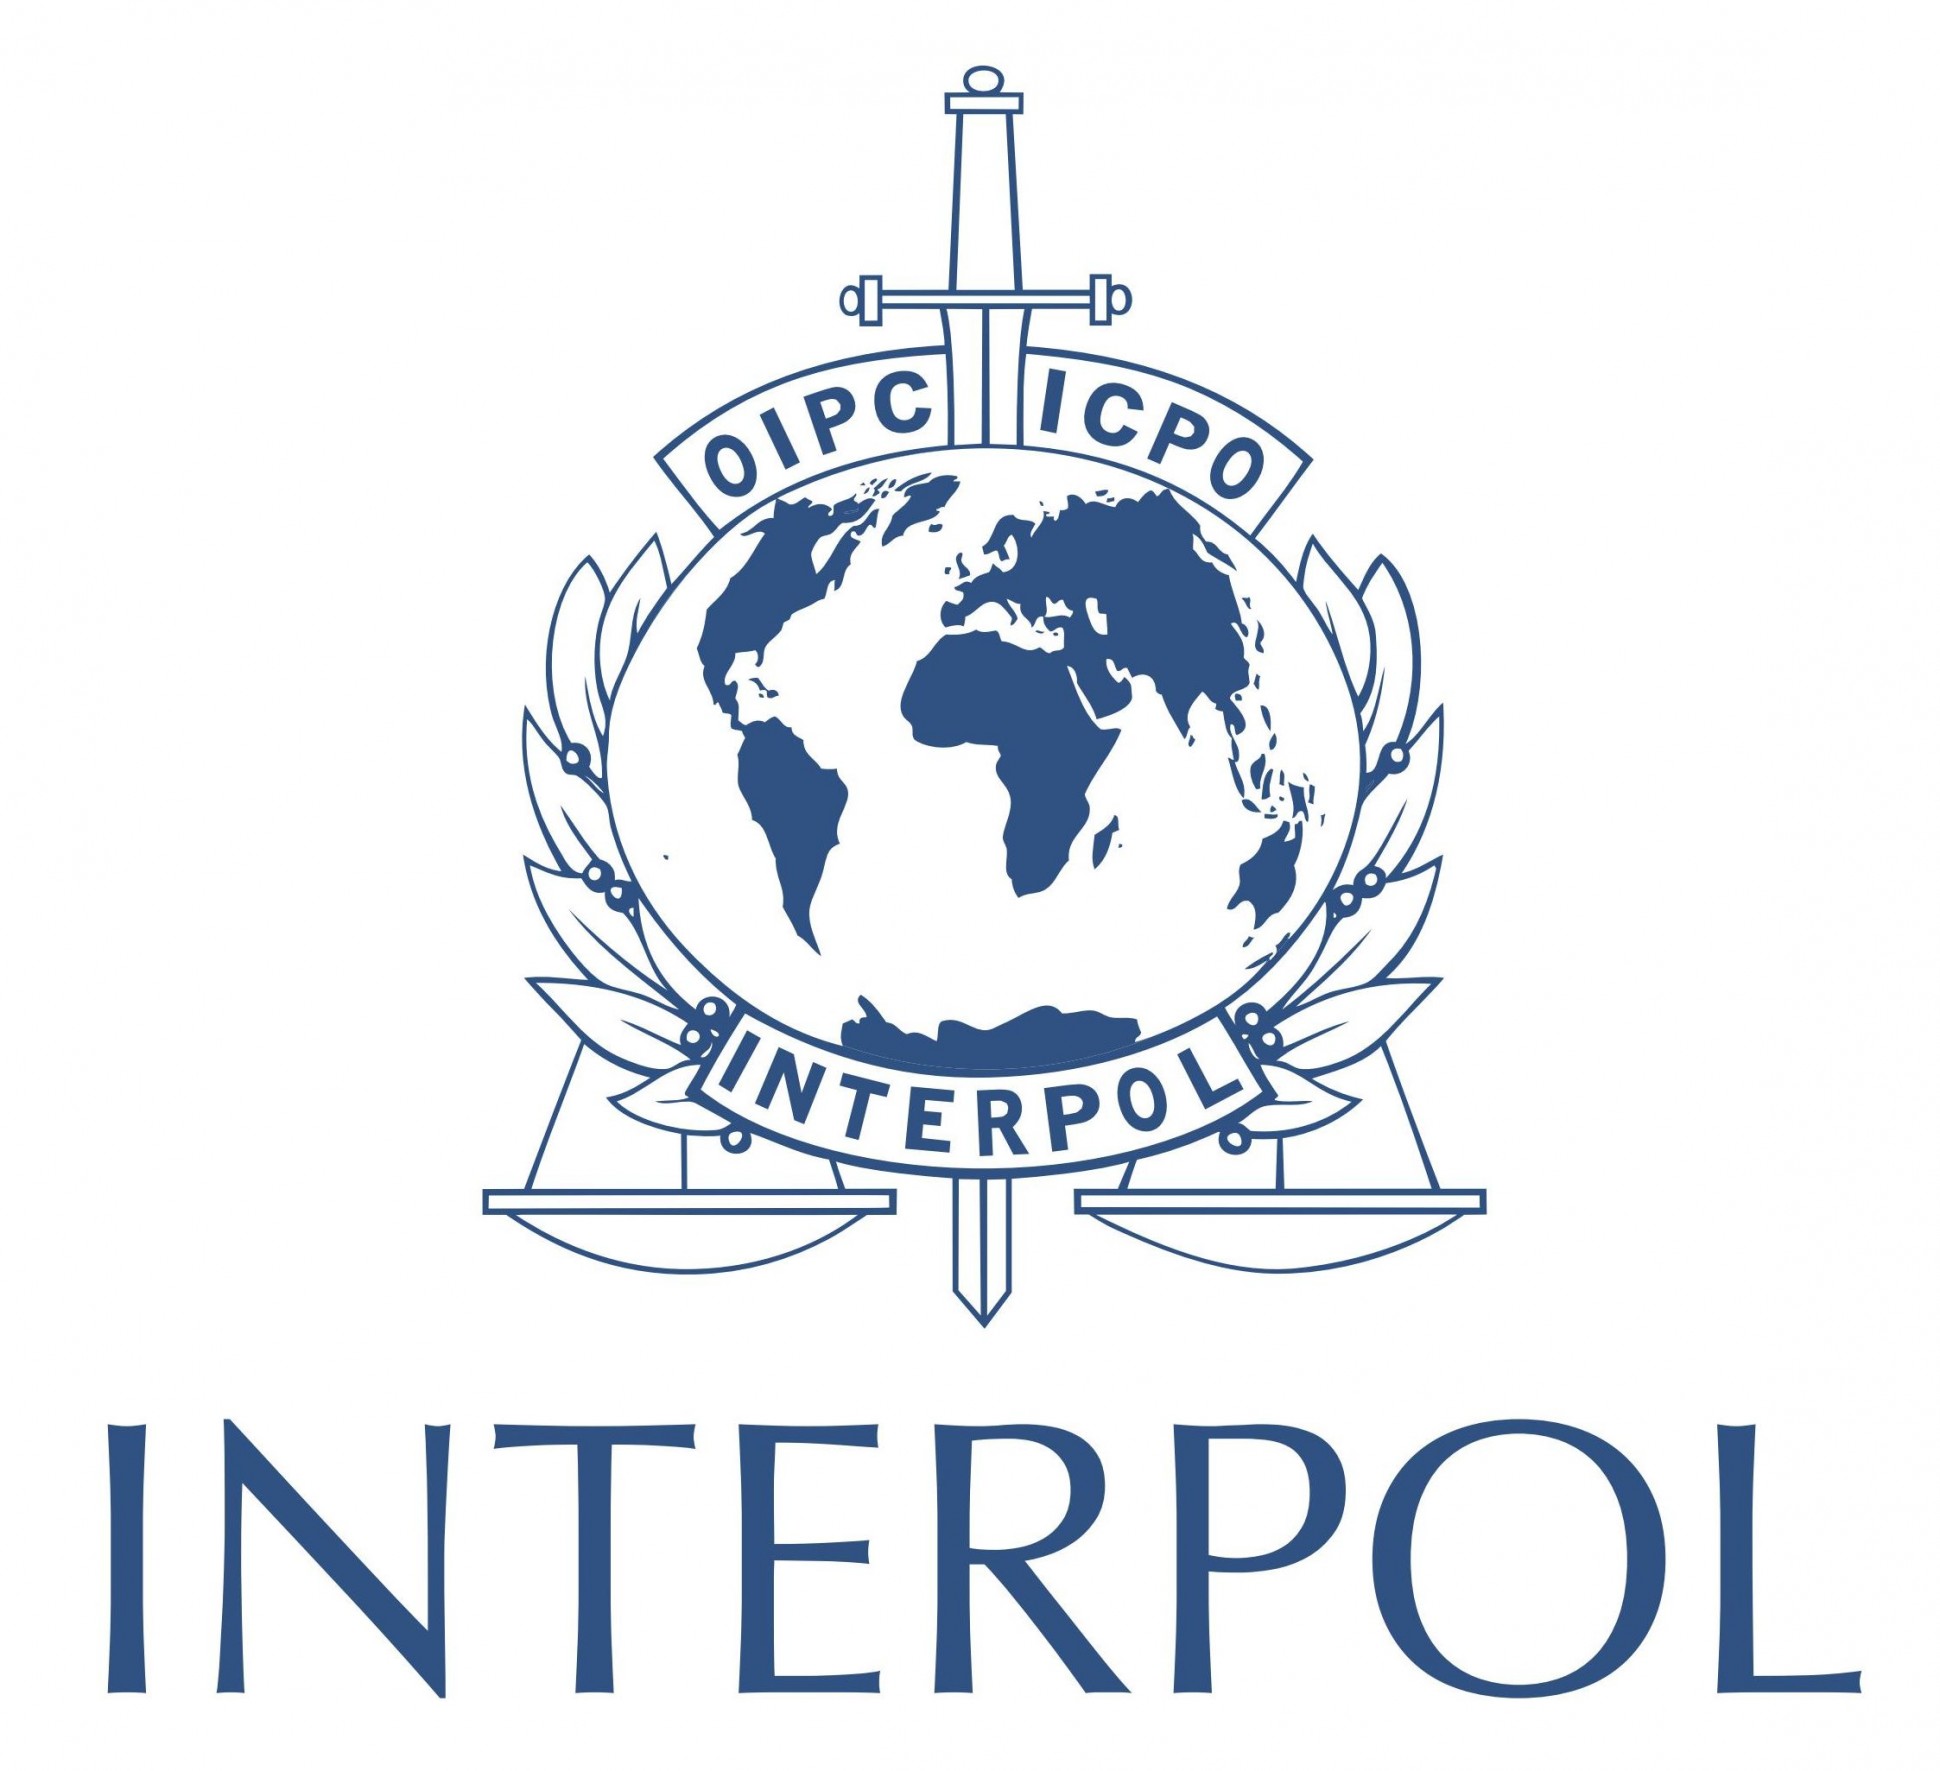 Man involved in banking fraud brought to Nepal with INTERPOL aid